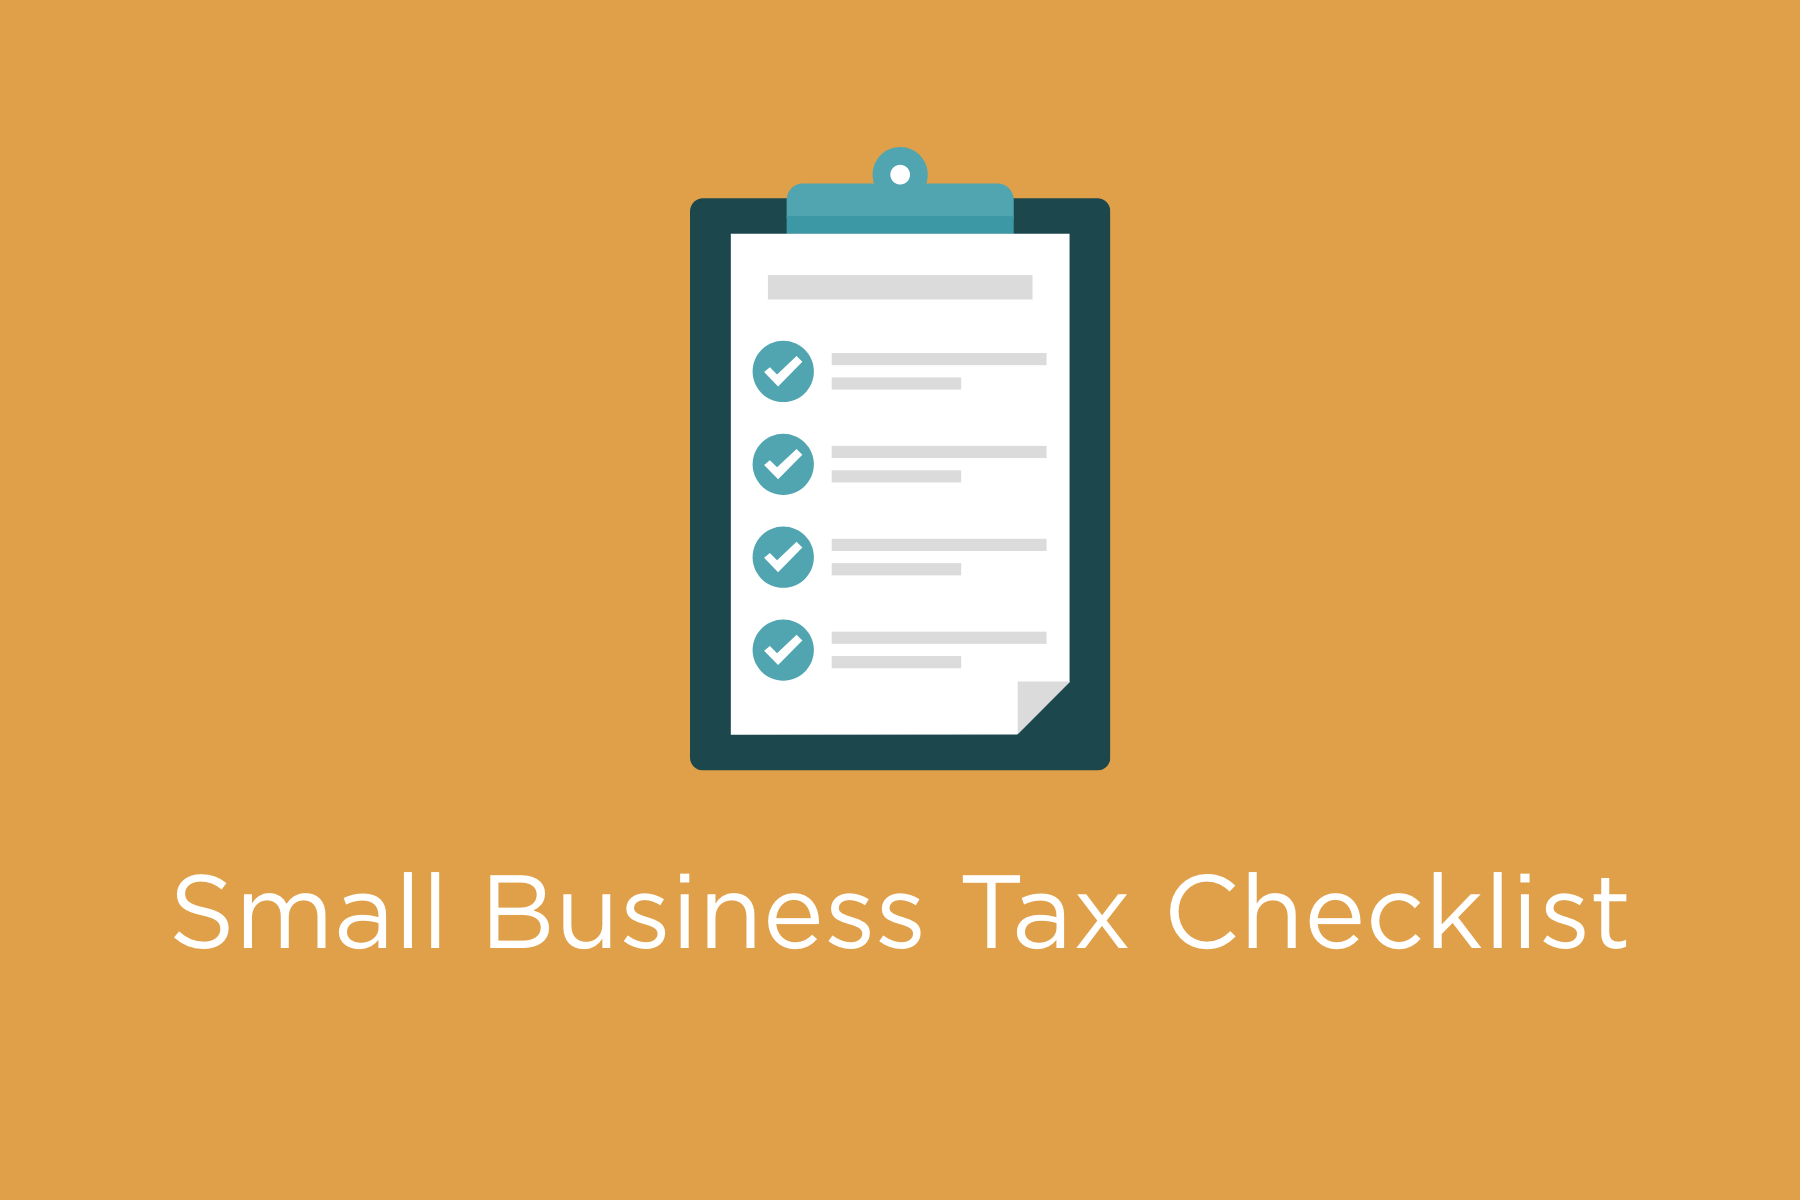 Your 2022 Small Business Tax Preparation Checklist